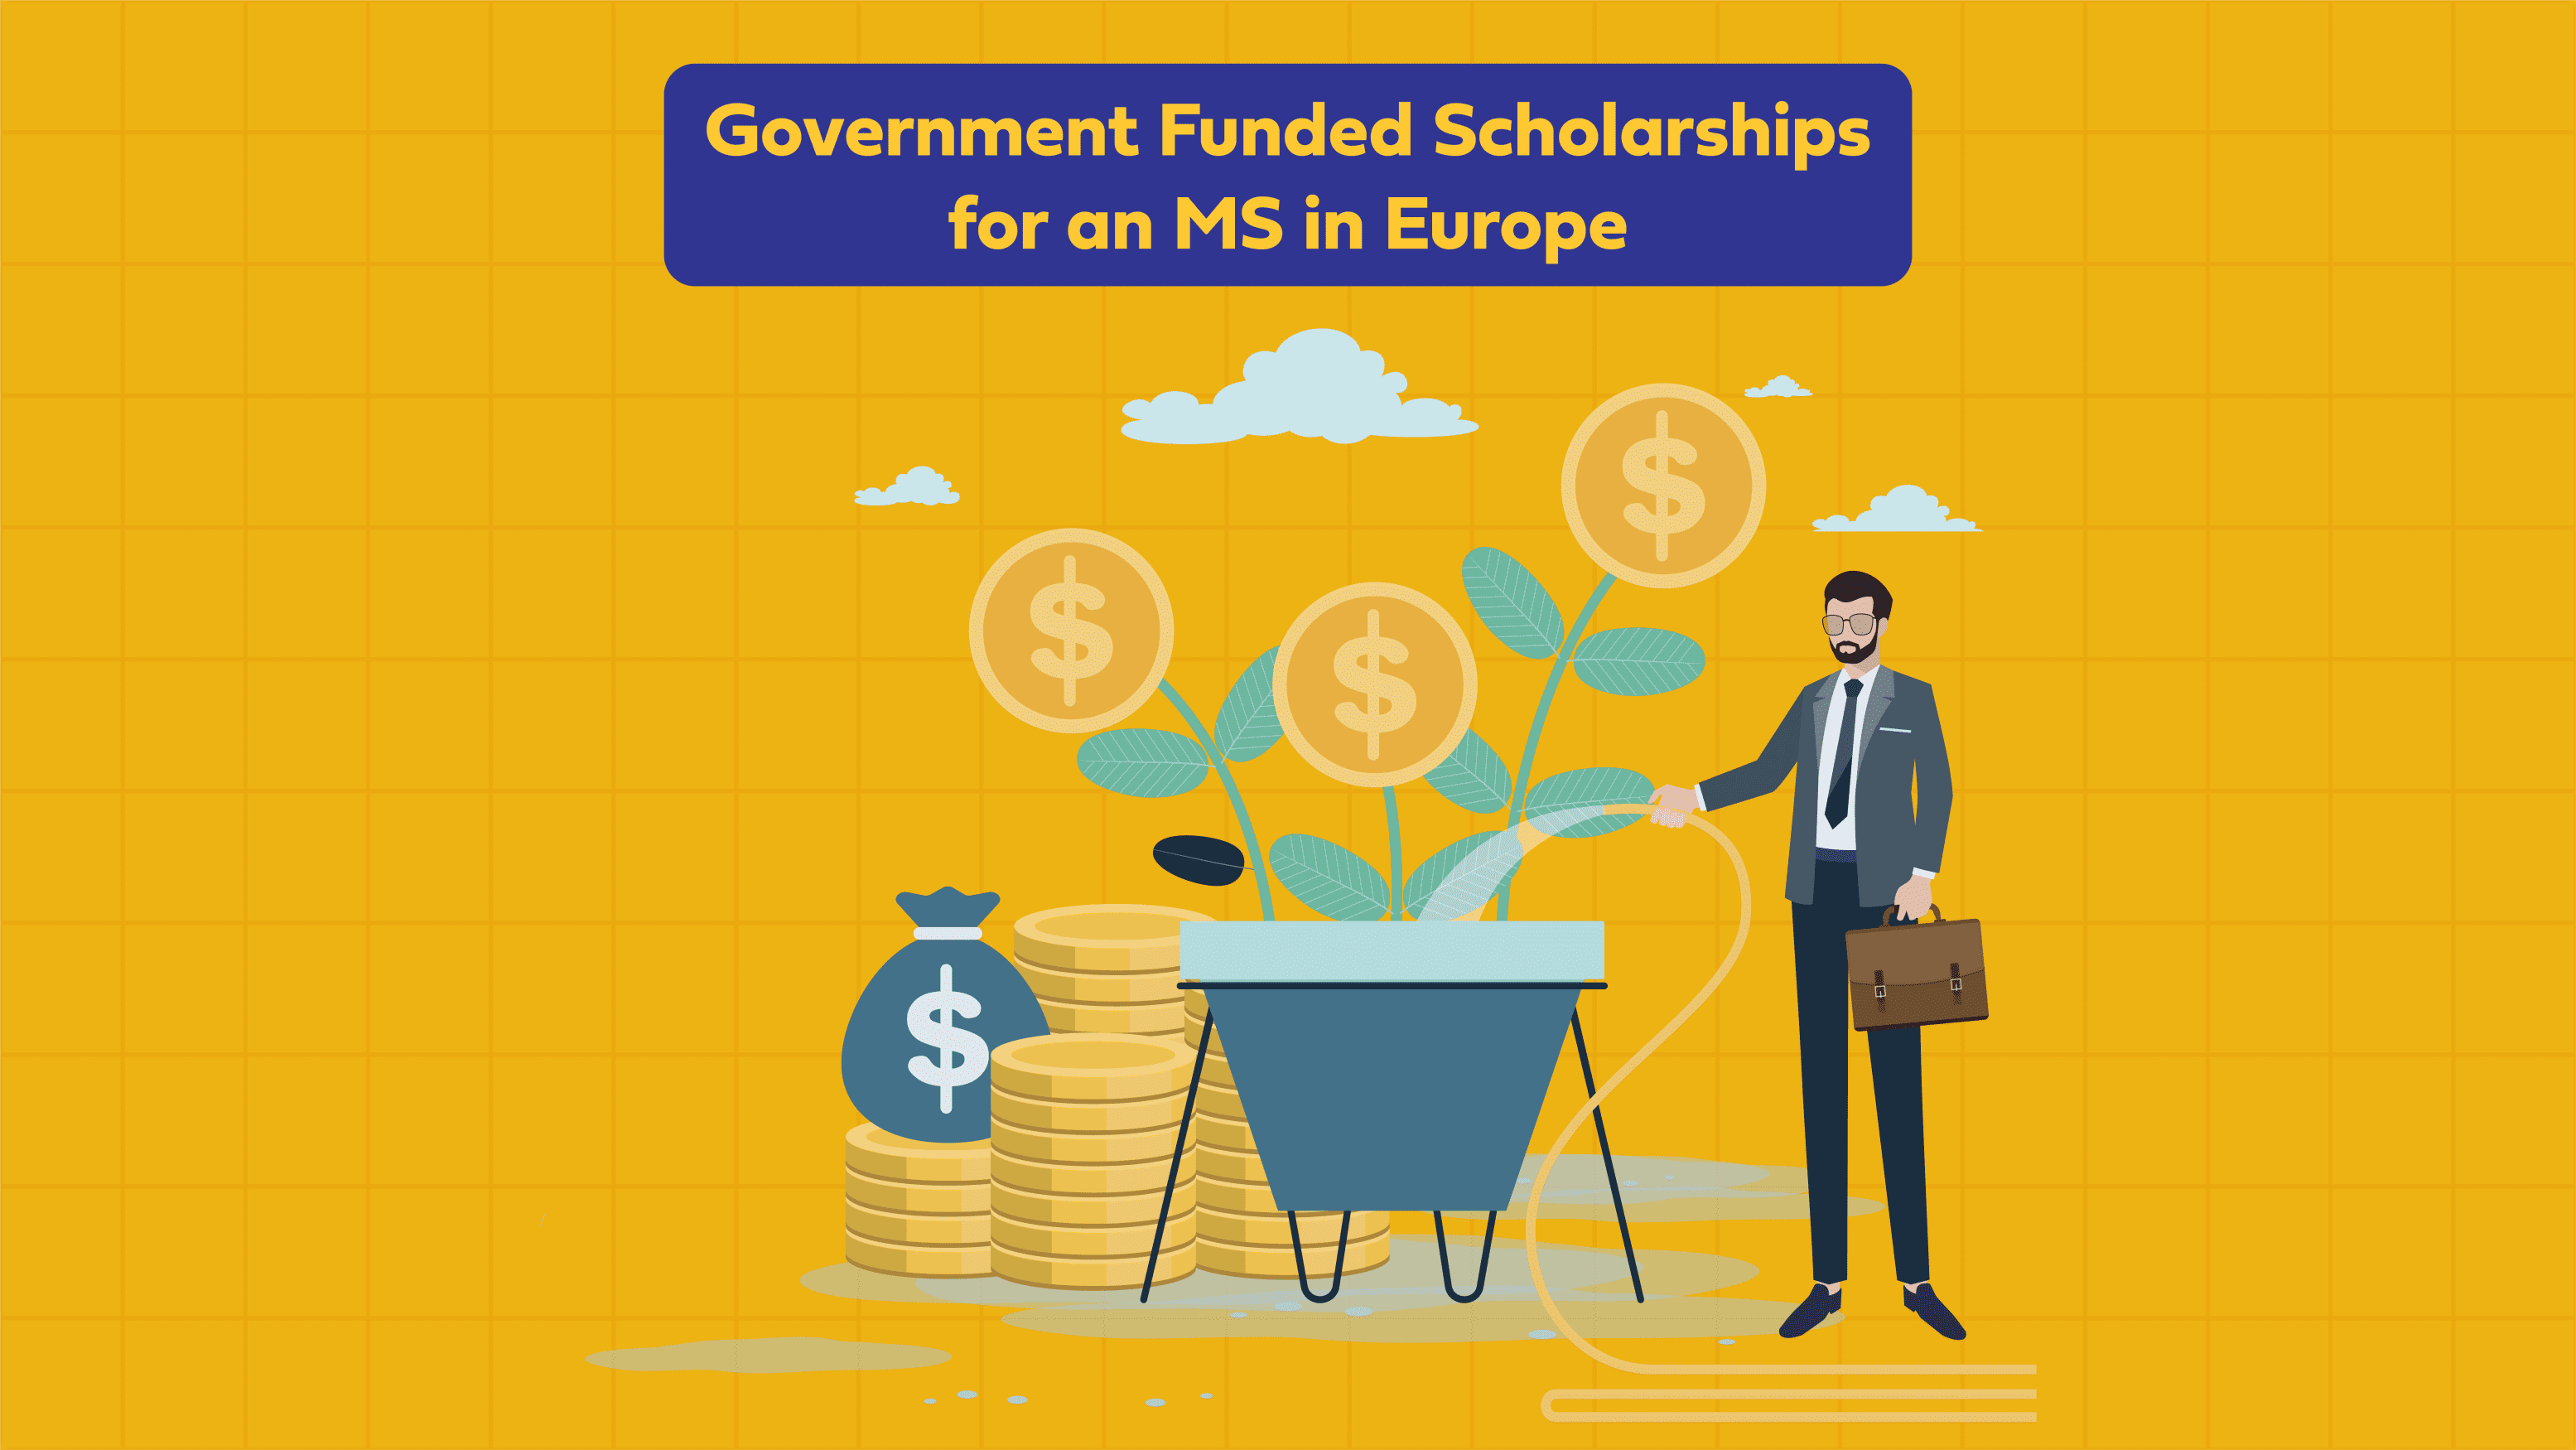 Government-Funded Scholarships for an M.S. in Europe